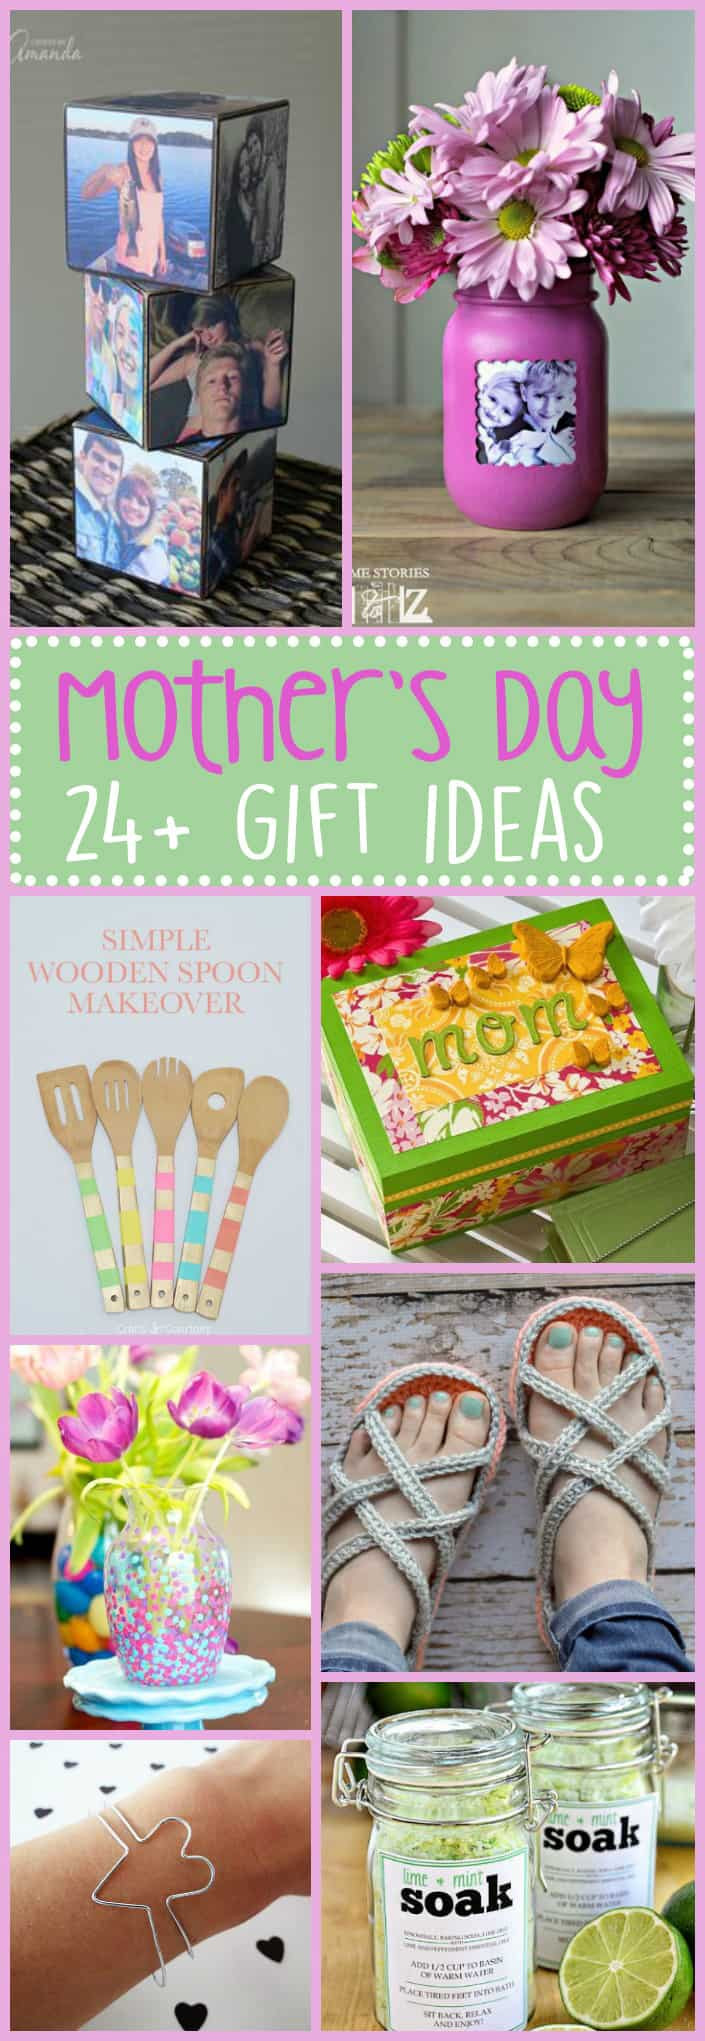 Mothers Day Gift Ideas Pinterest
 Mother s Day Gift Ideas 24 t ideas for Mother s Day